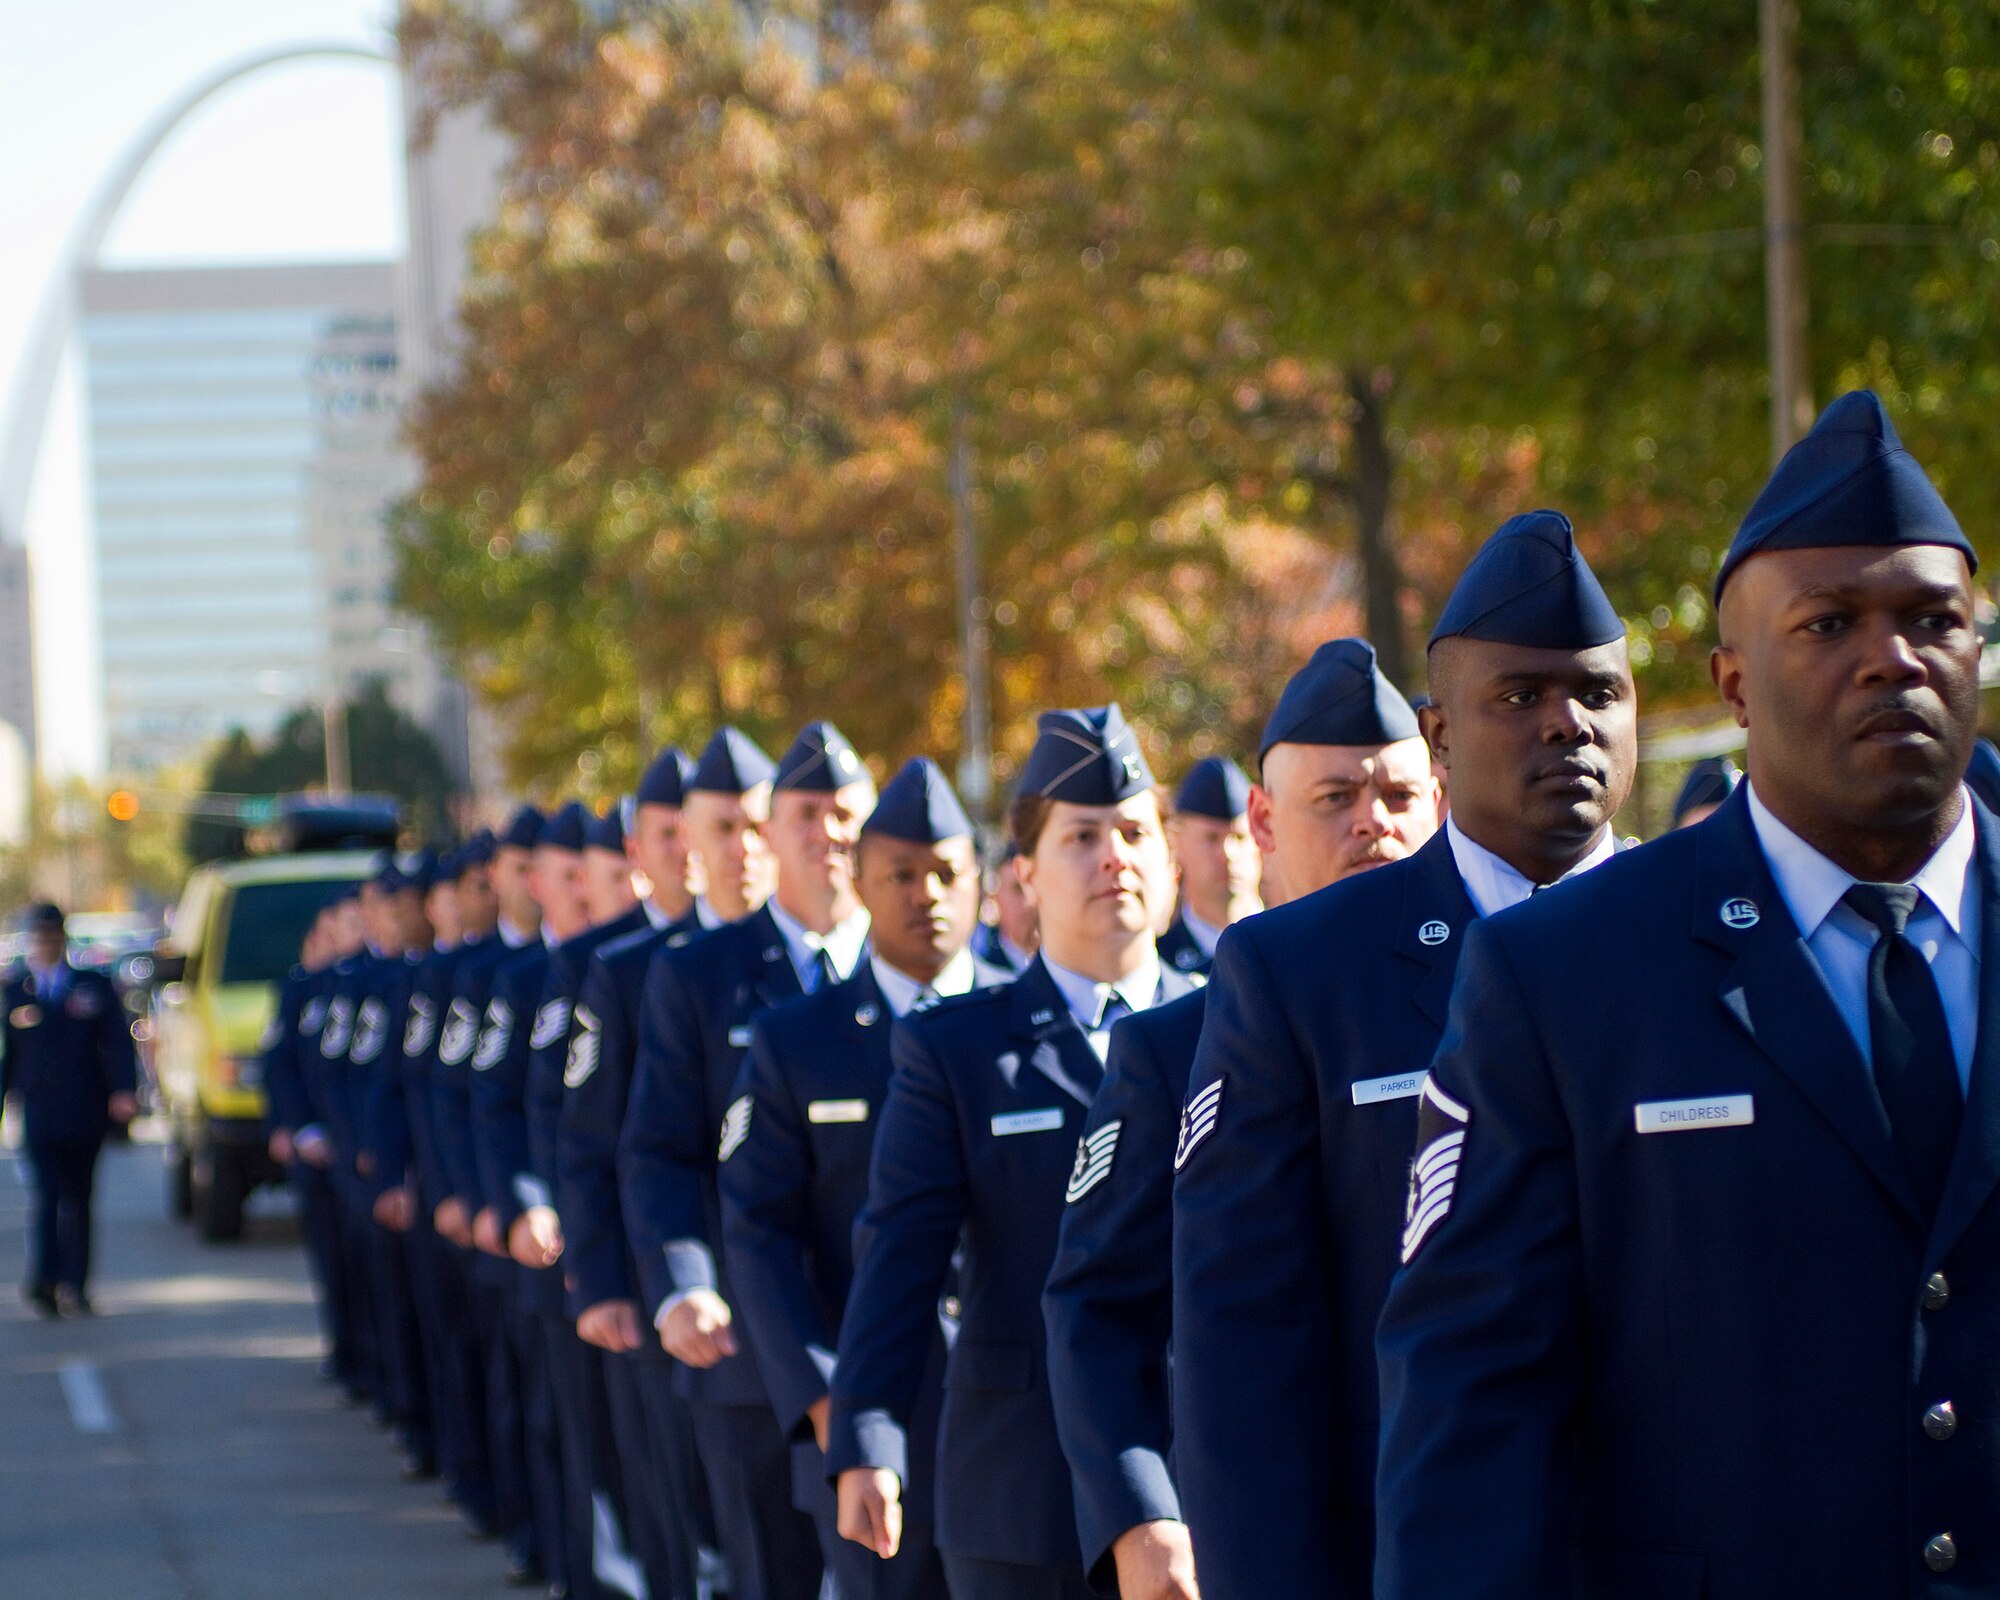 ST LOUIS, Mo. -- More than 100 Airmen from the Air Force Network Integration Center at Scott Air Force Base, Ill., participated in the St. Louis Veterans Day parade Nov 6.  (U.S. Air Force photo/MSgt G. Shawn Lowry)
